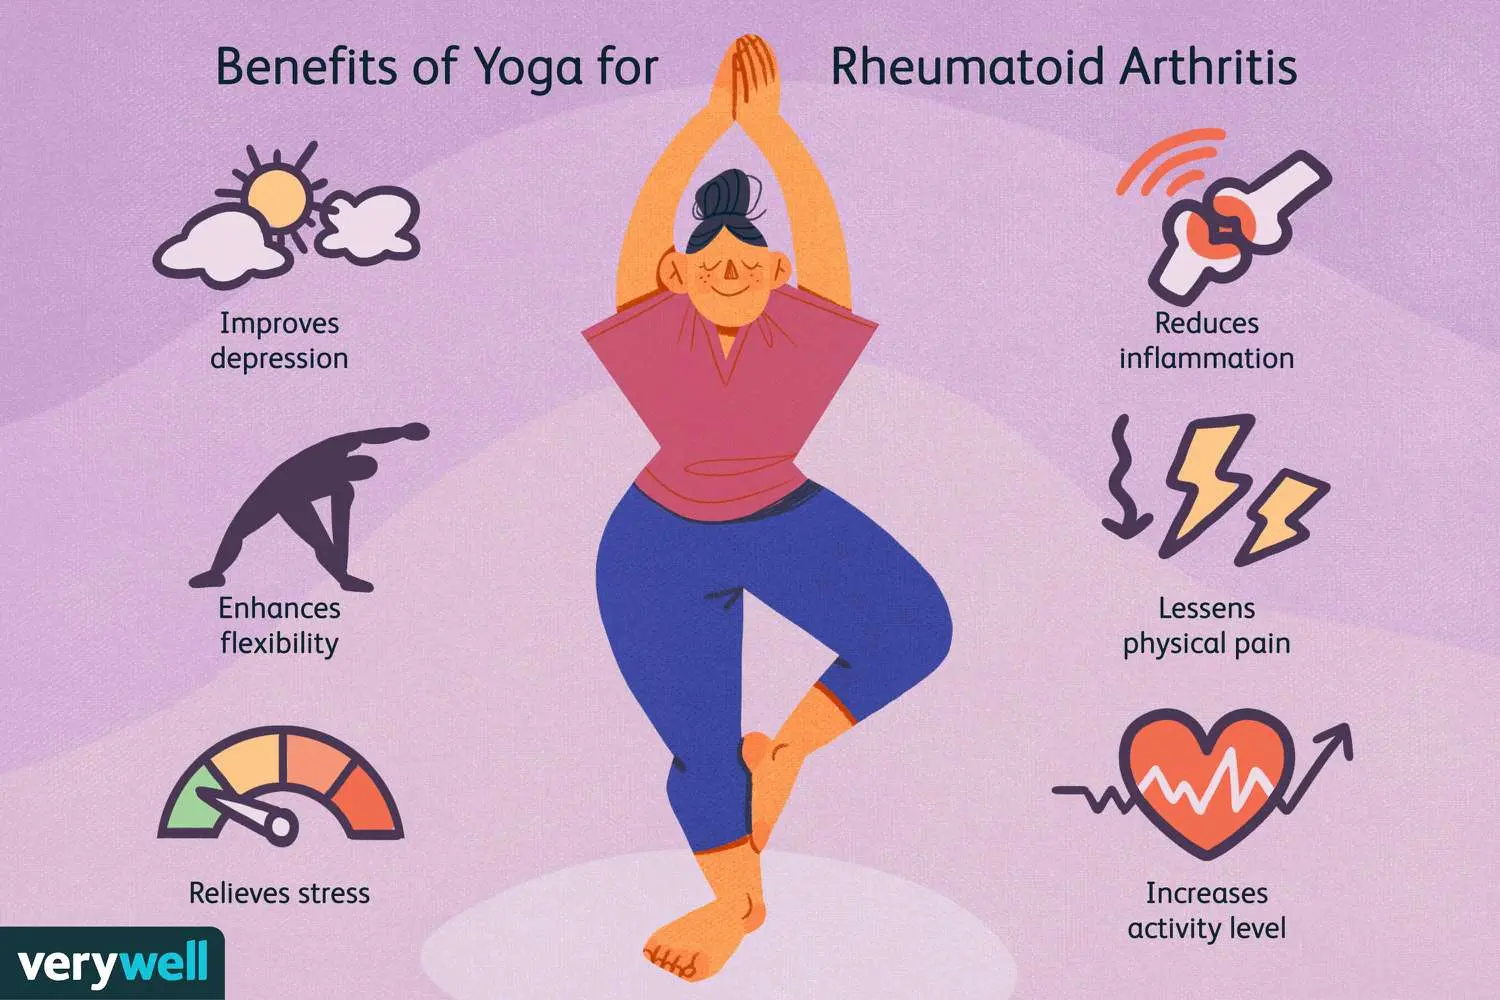 yoga for arthritis in hands - Does squeezing a ball help arthritis